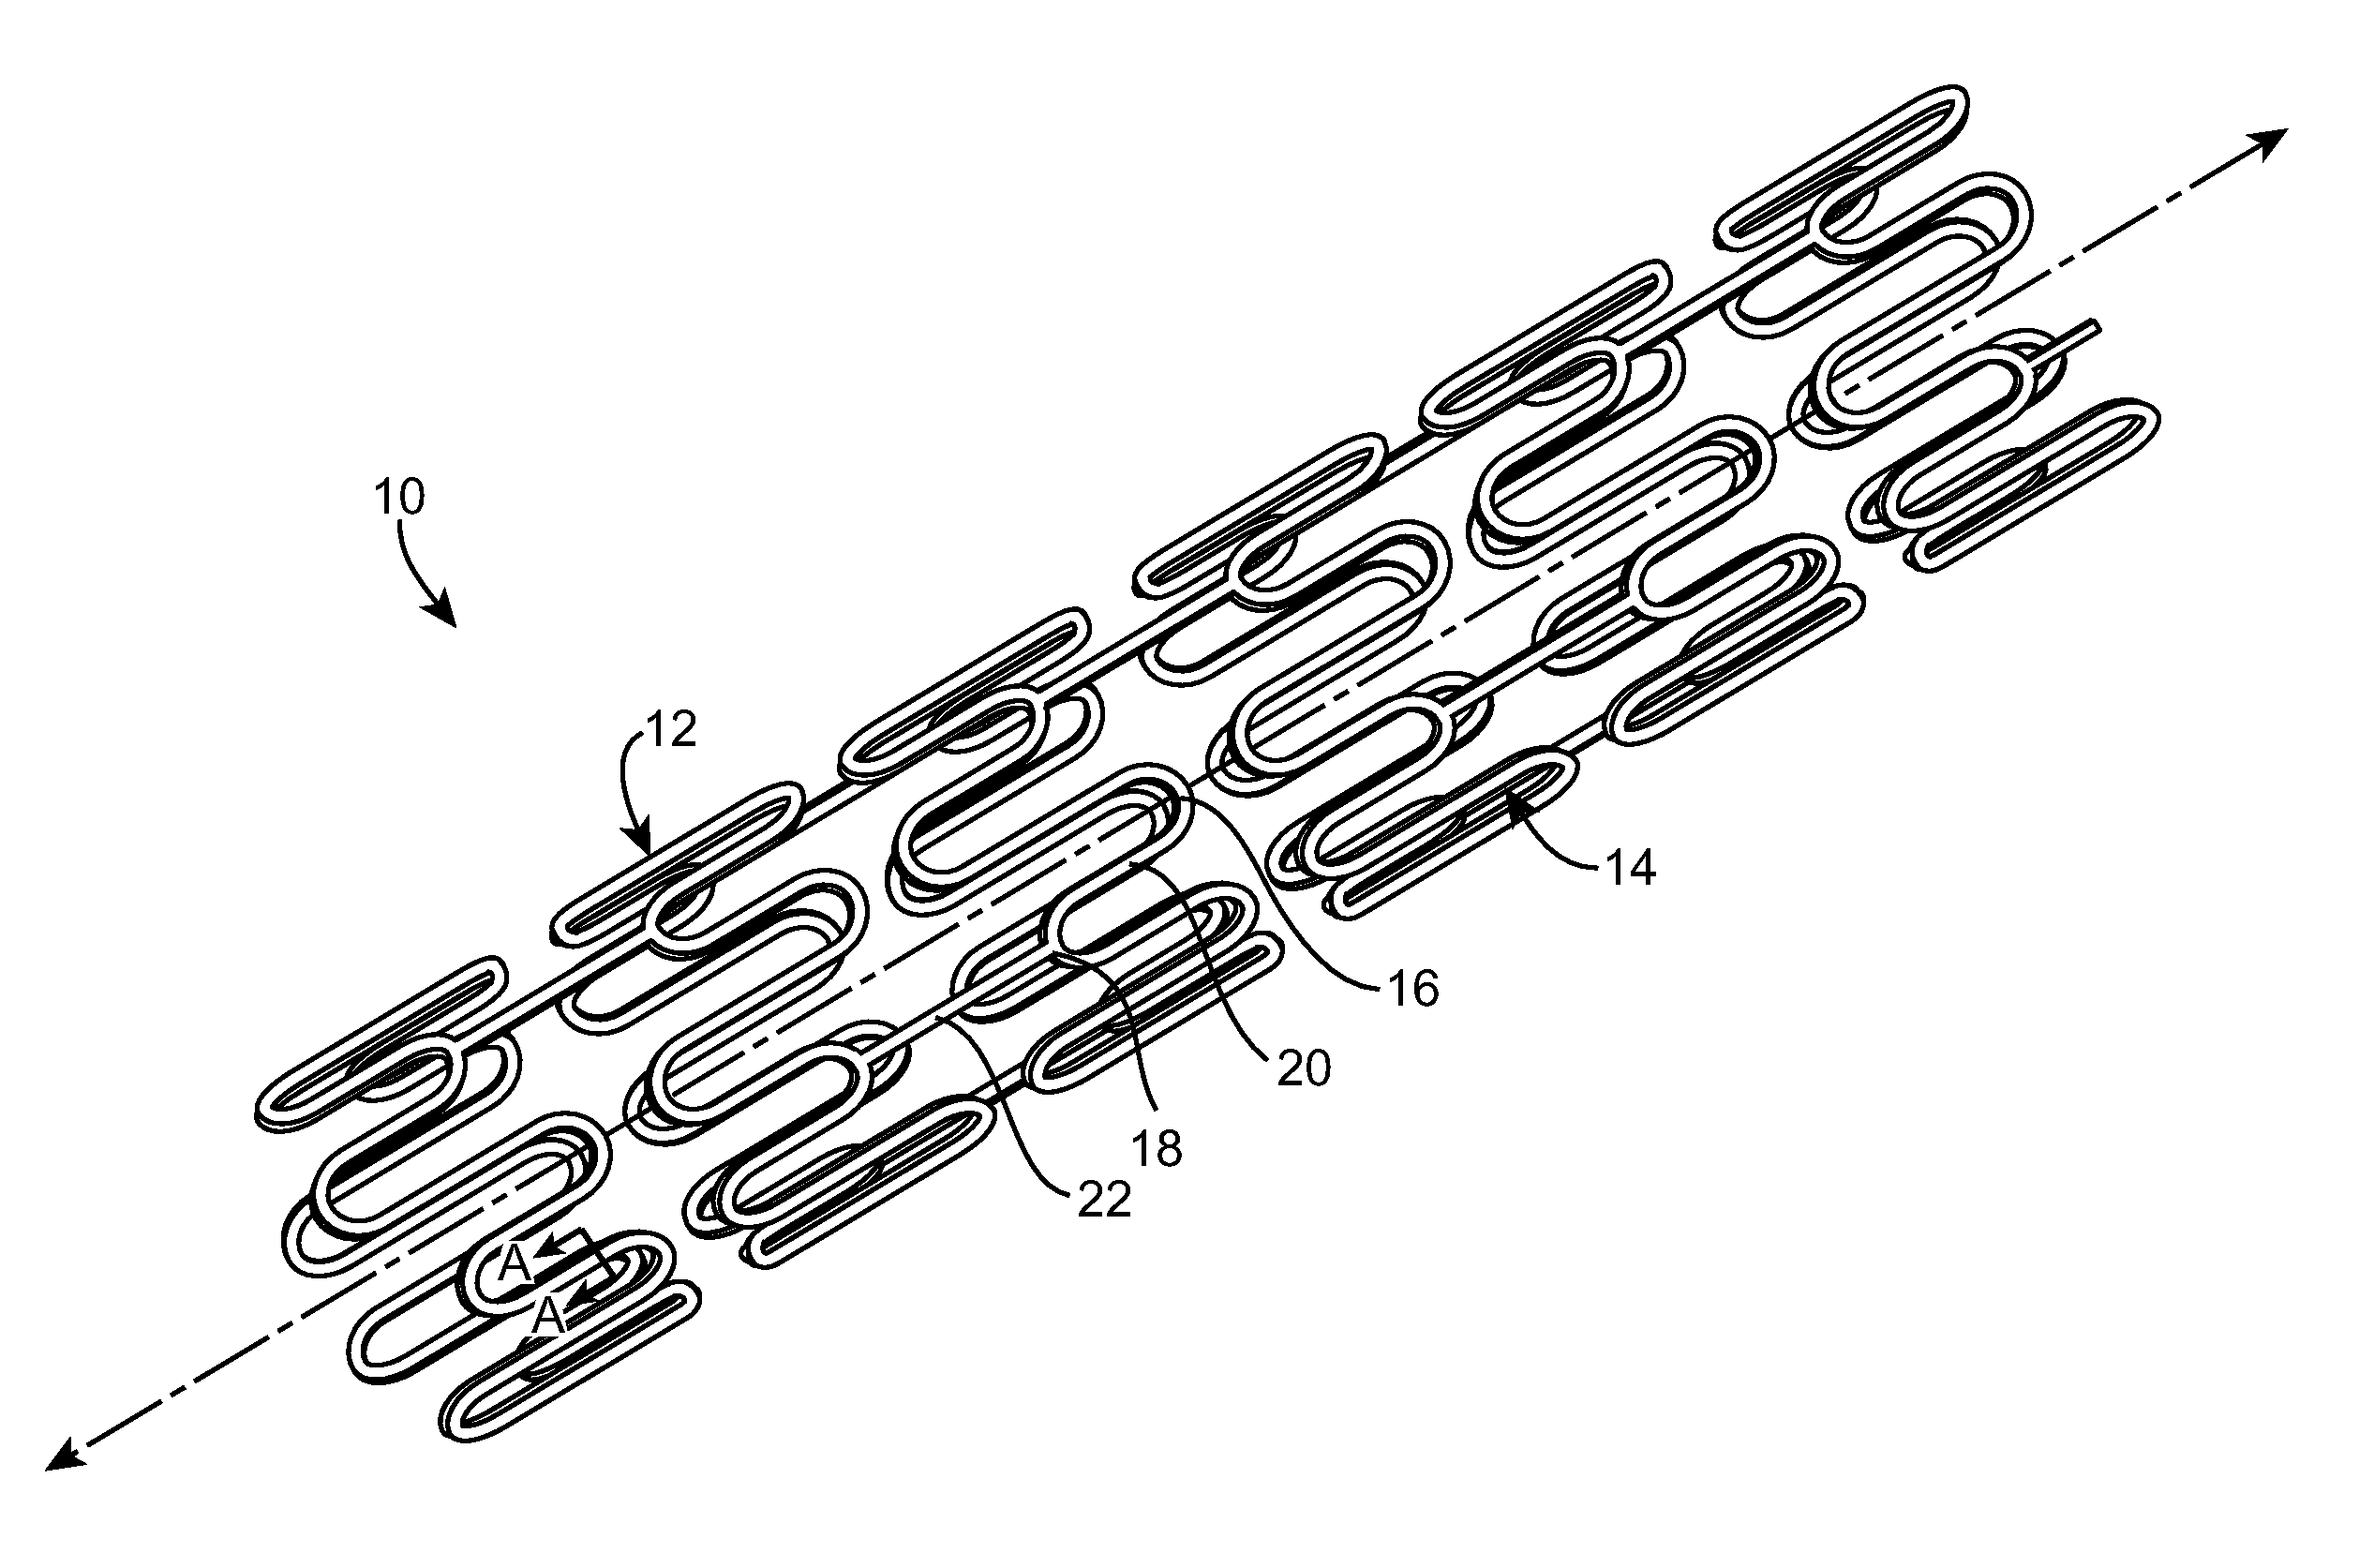 Stent Having Controlled Porosity for Improved Ductility